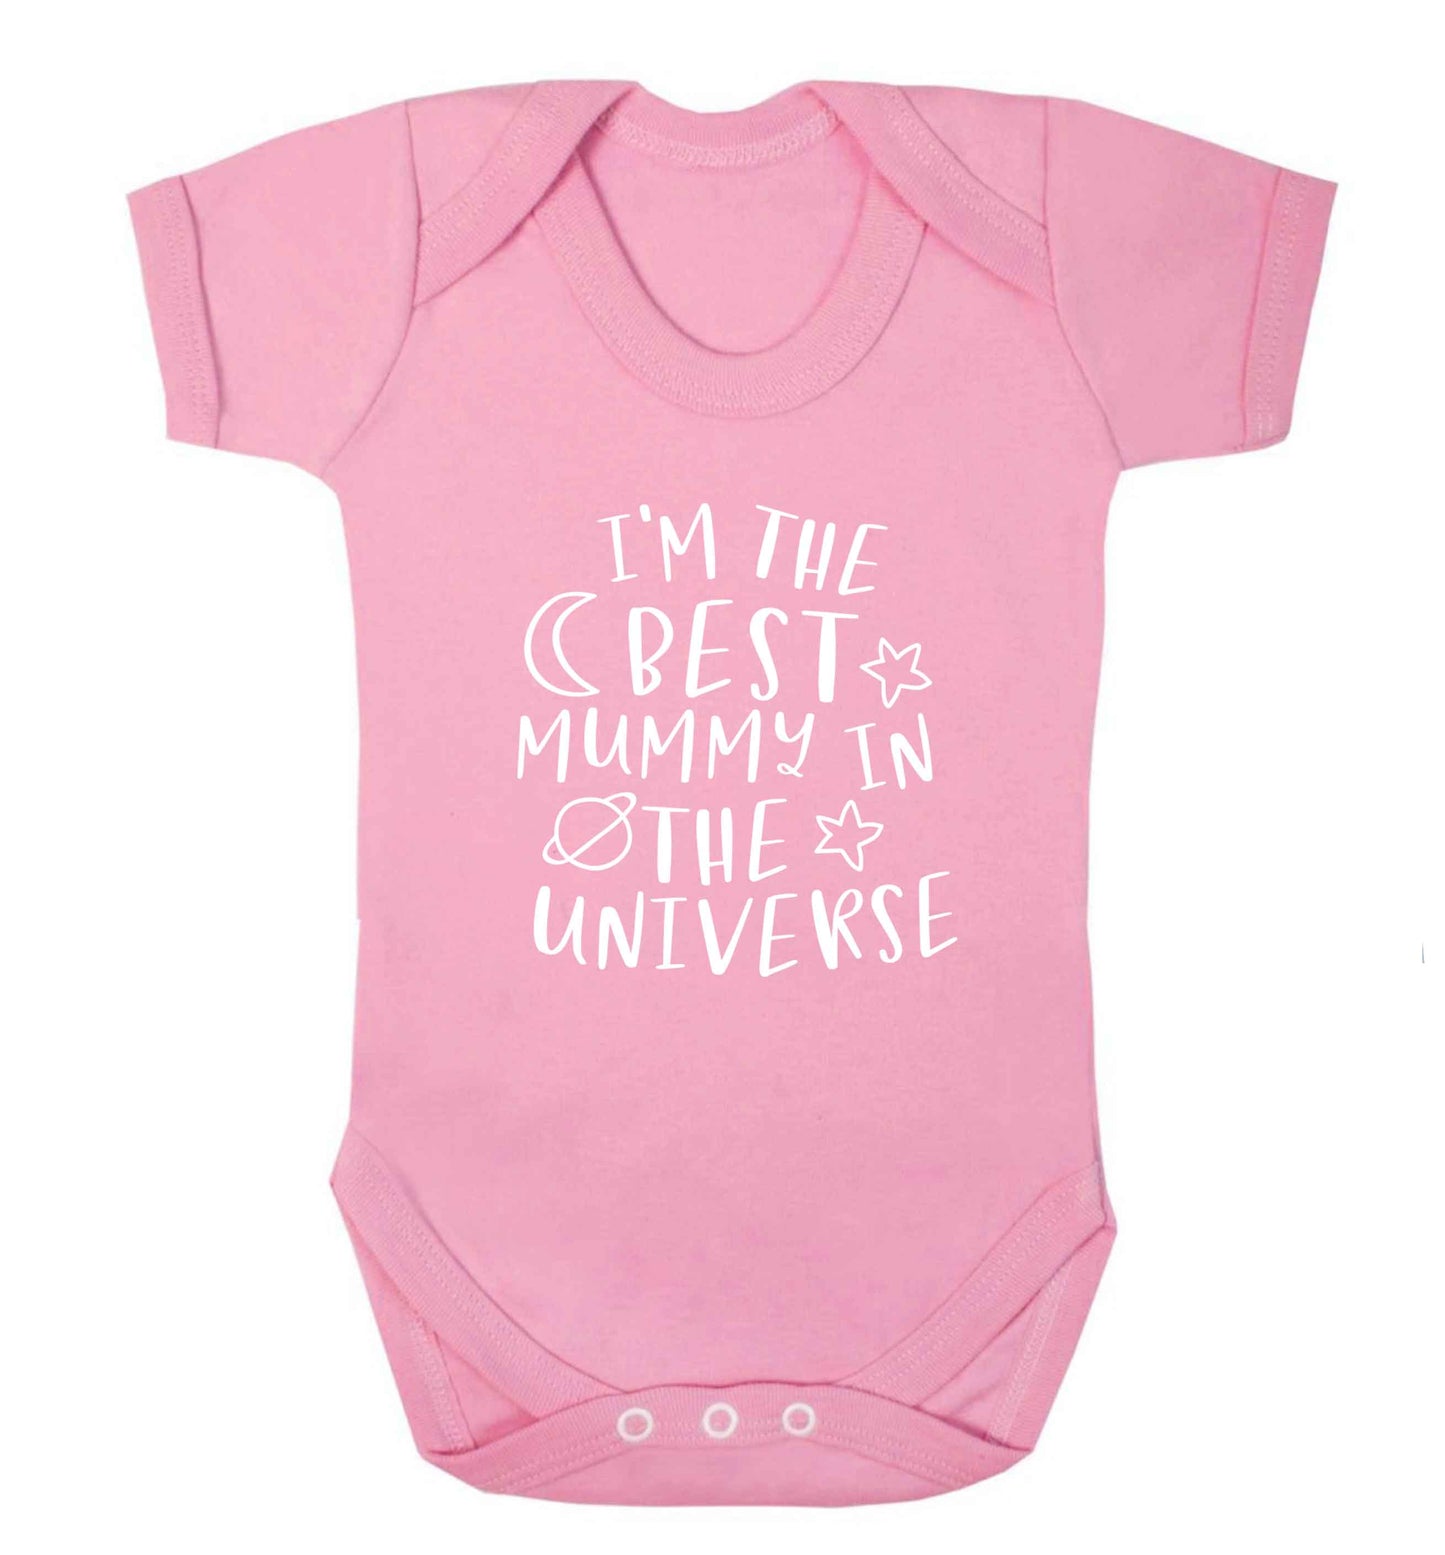 I'm the best mummy in the universe baby vest pale pink 18-24 months